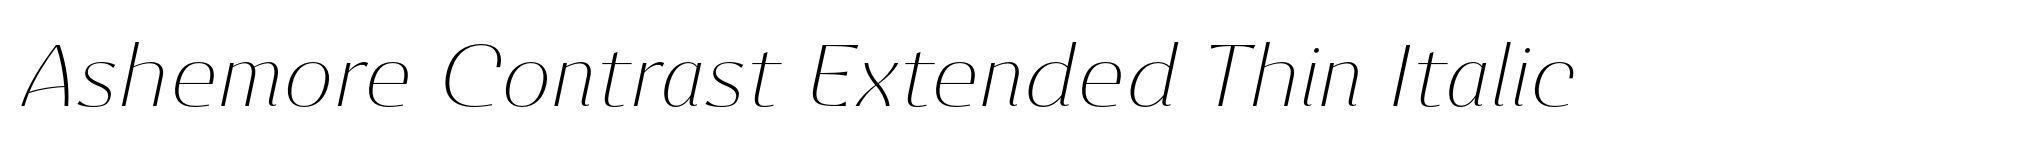 Ashemore Contrast Extended Thin Italic image